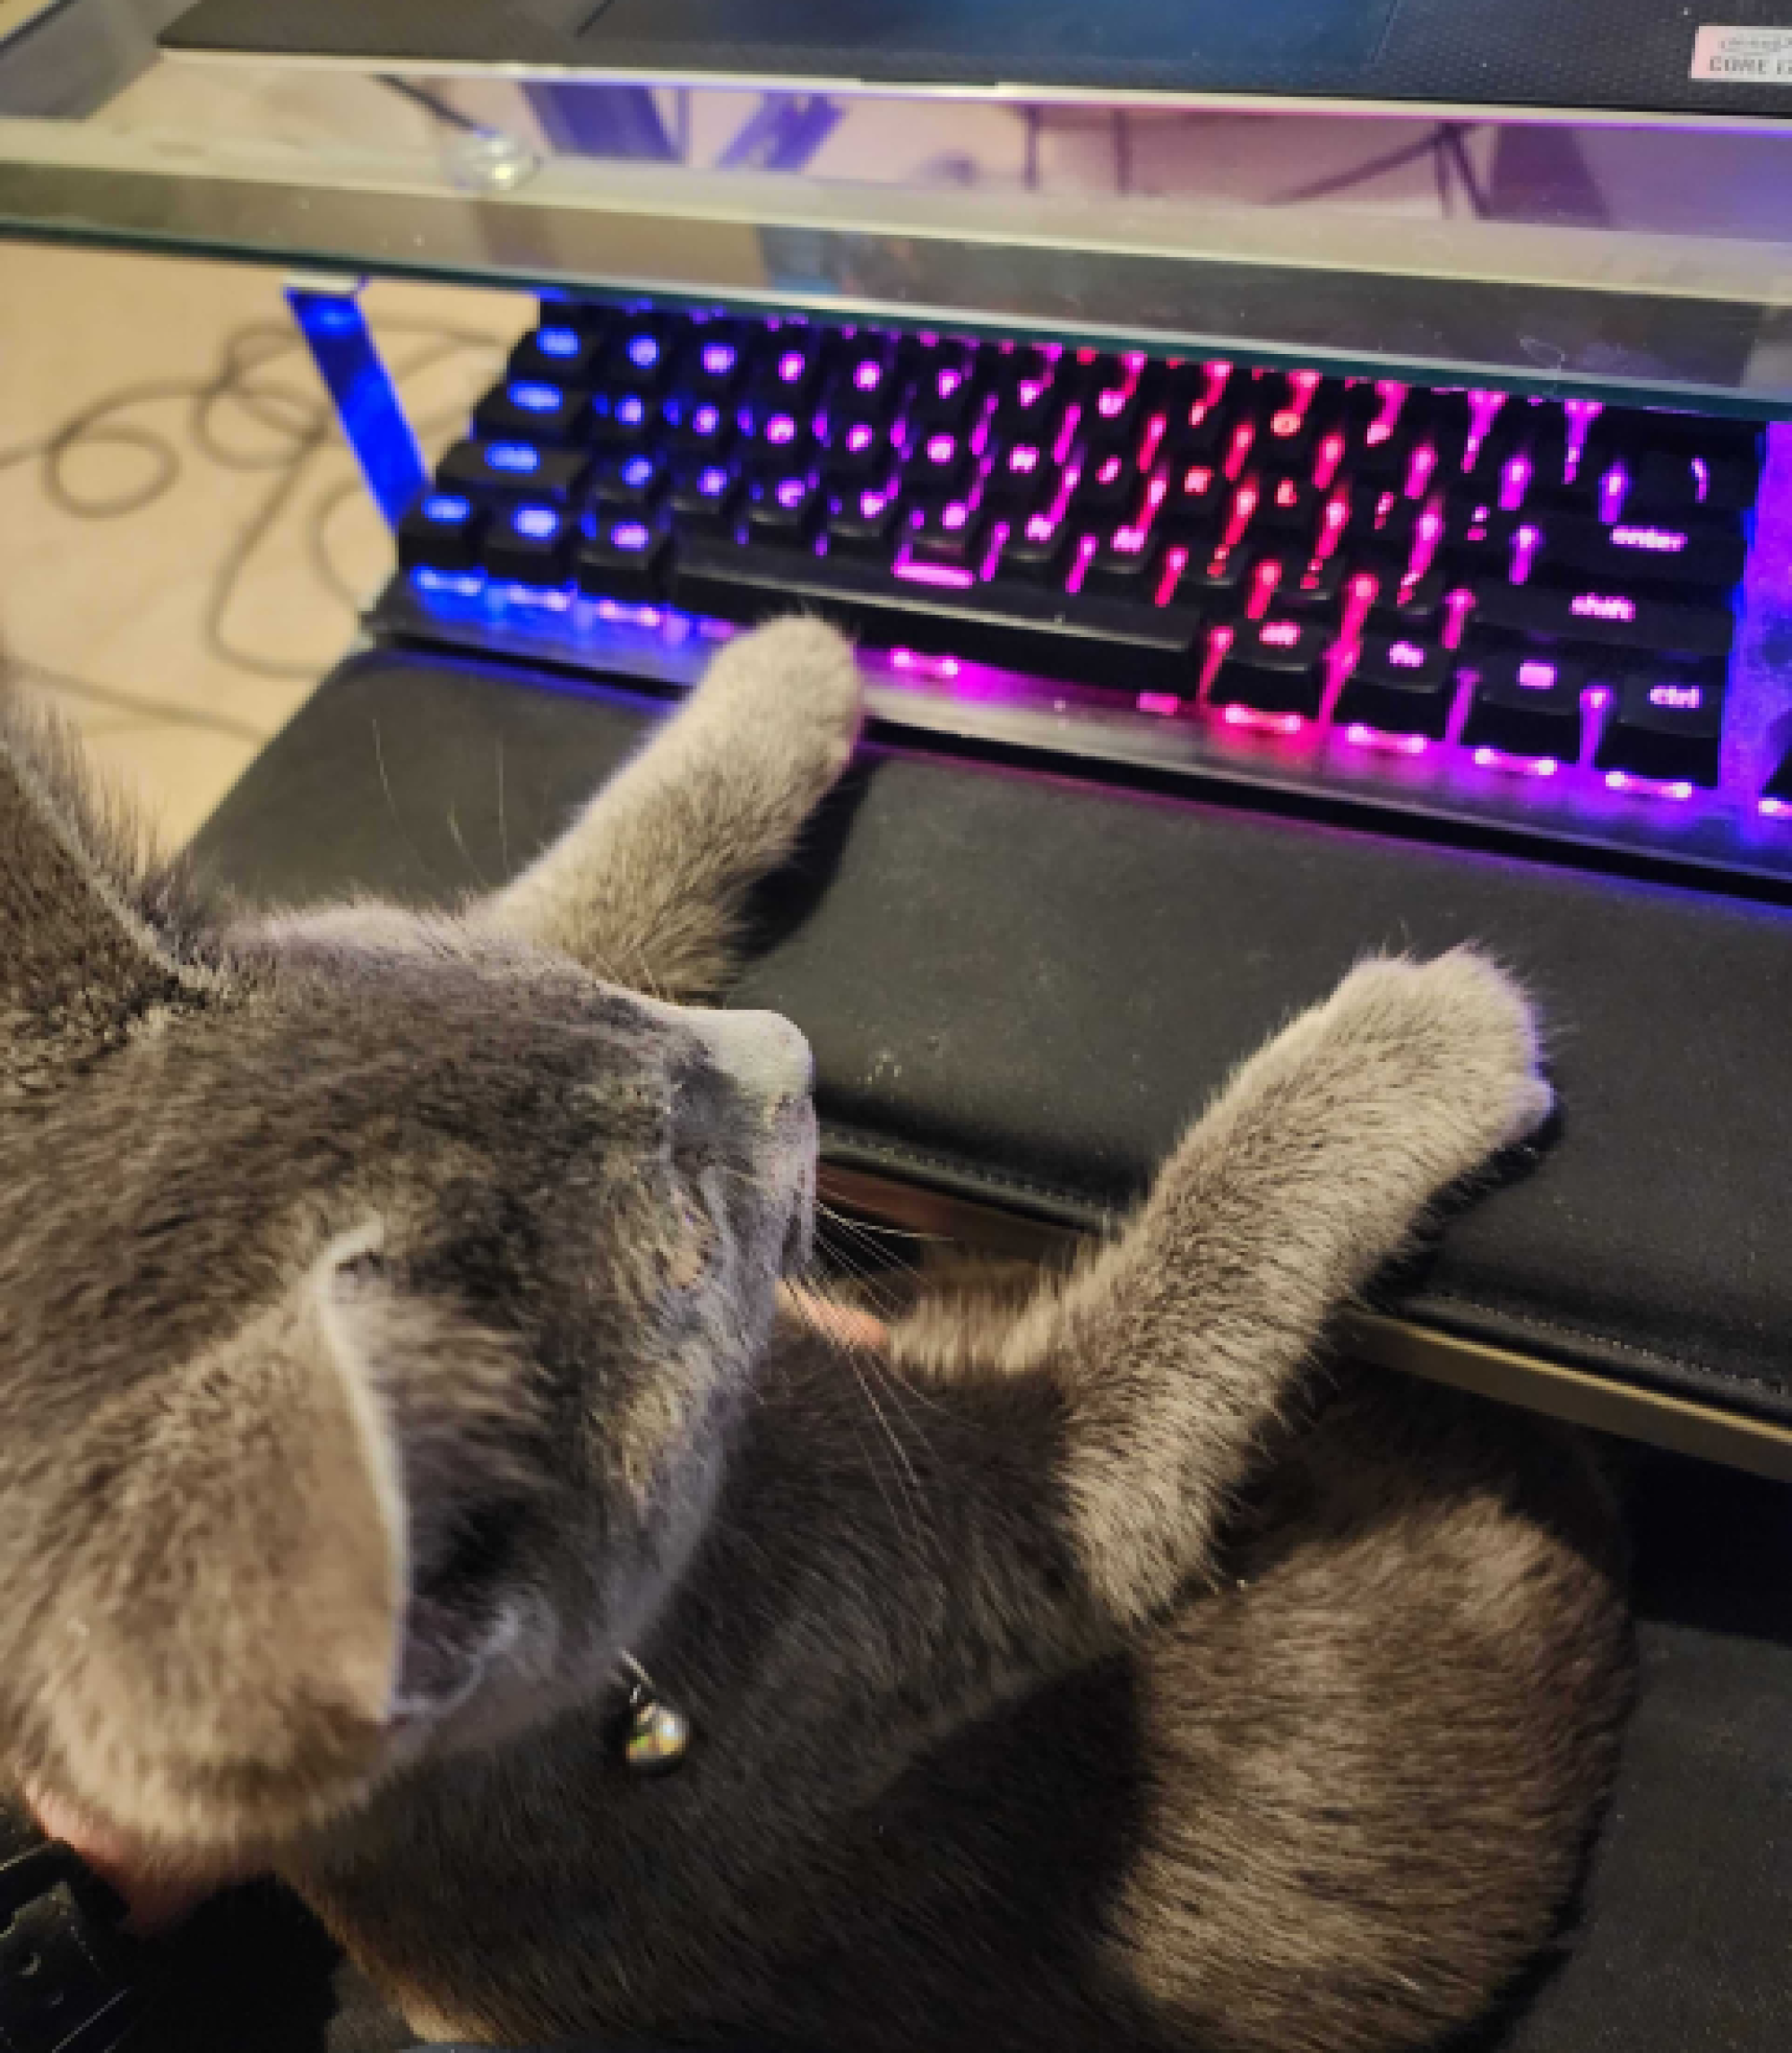 A small, light-gray cat sitting at a computer desk with their pawns on a wrist rest in front of a lit up keyboard